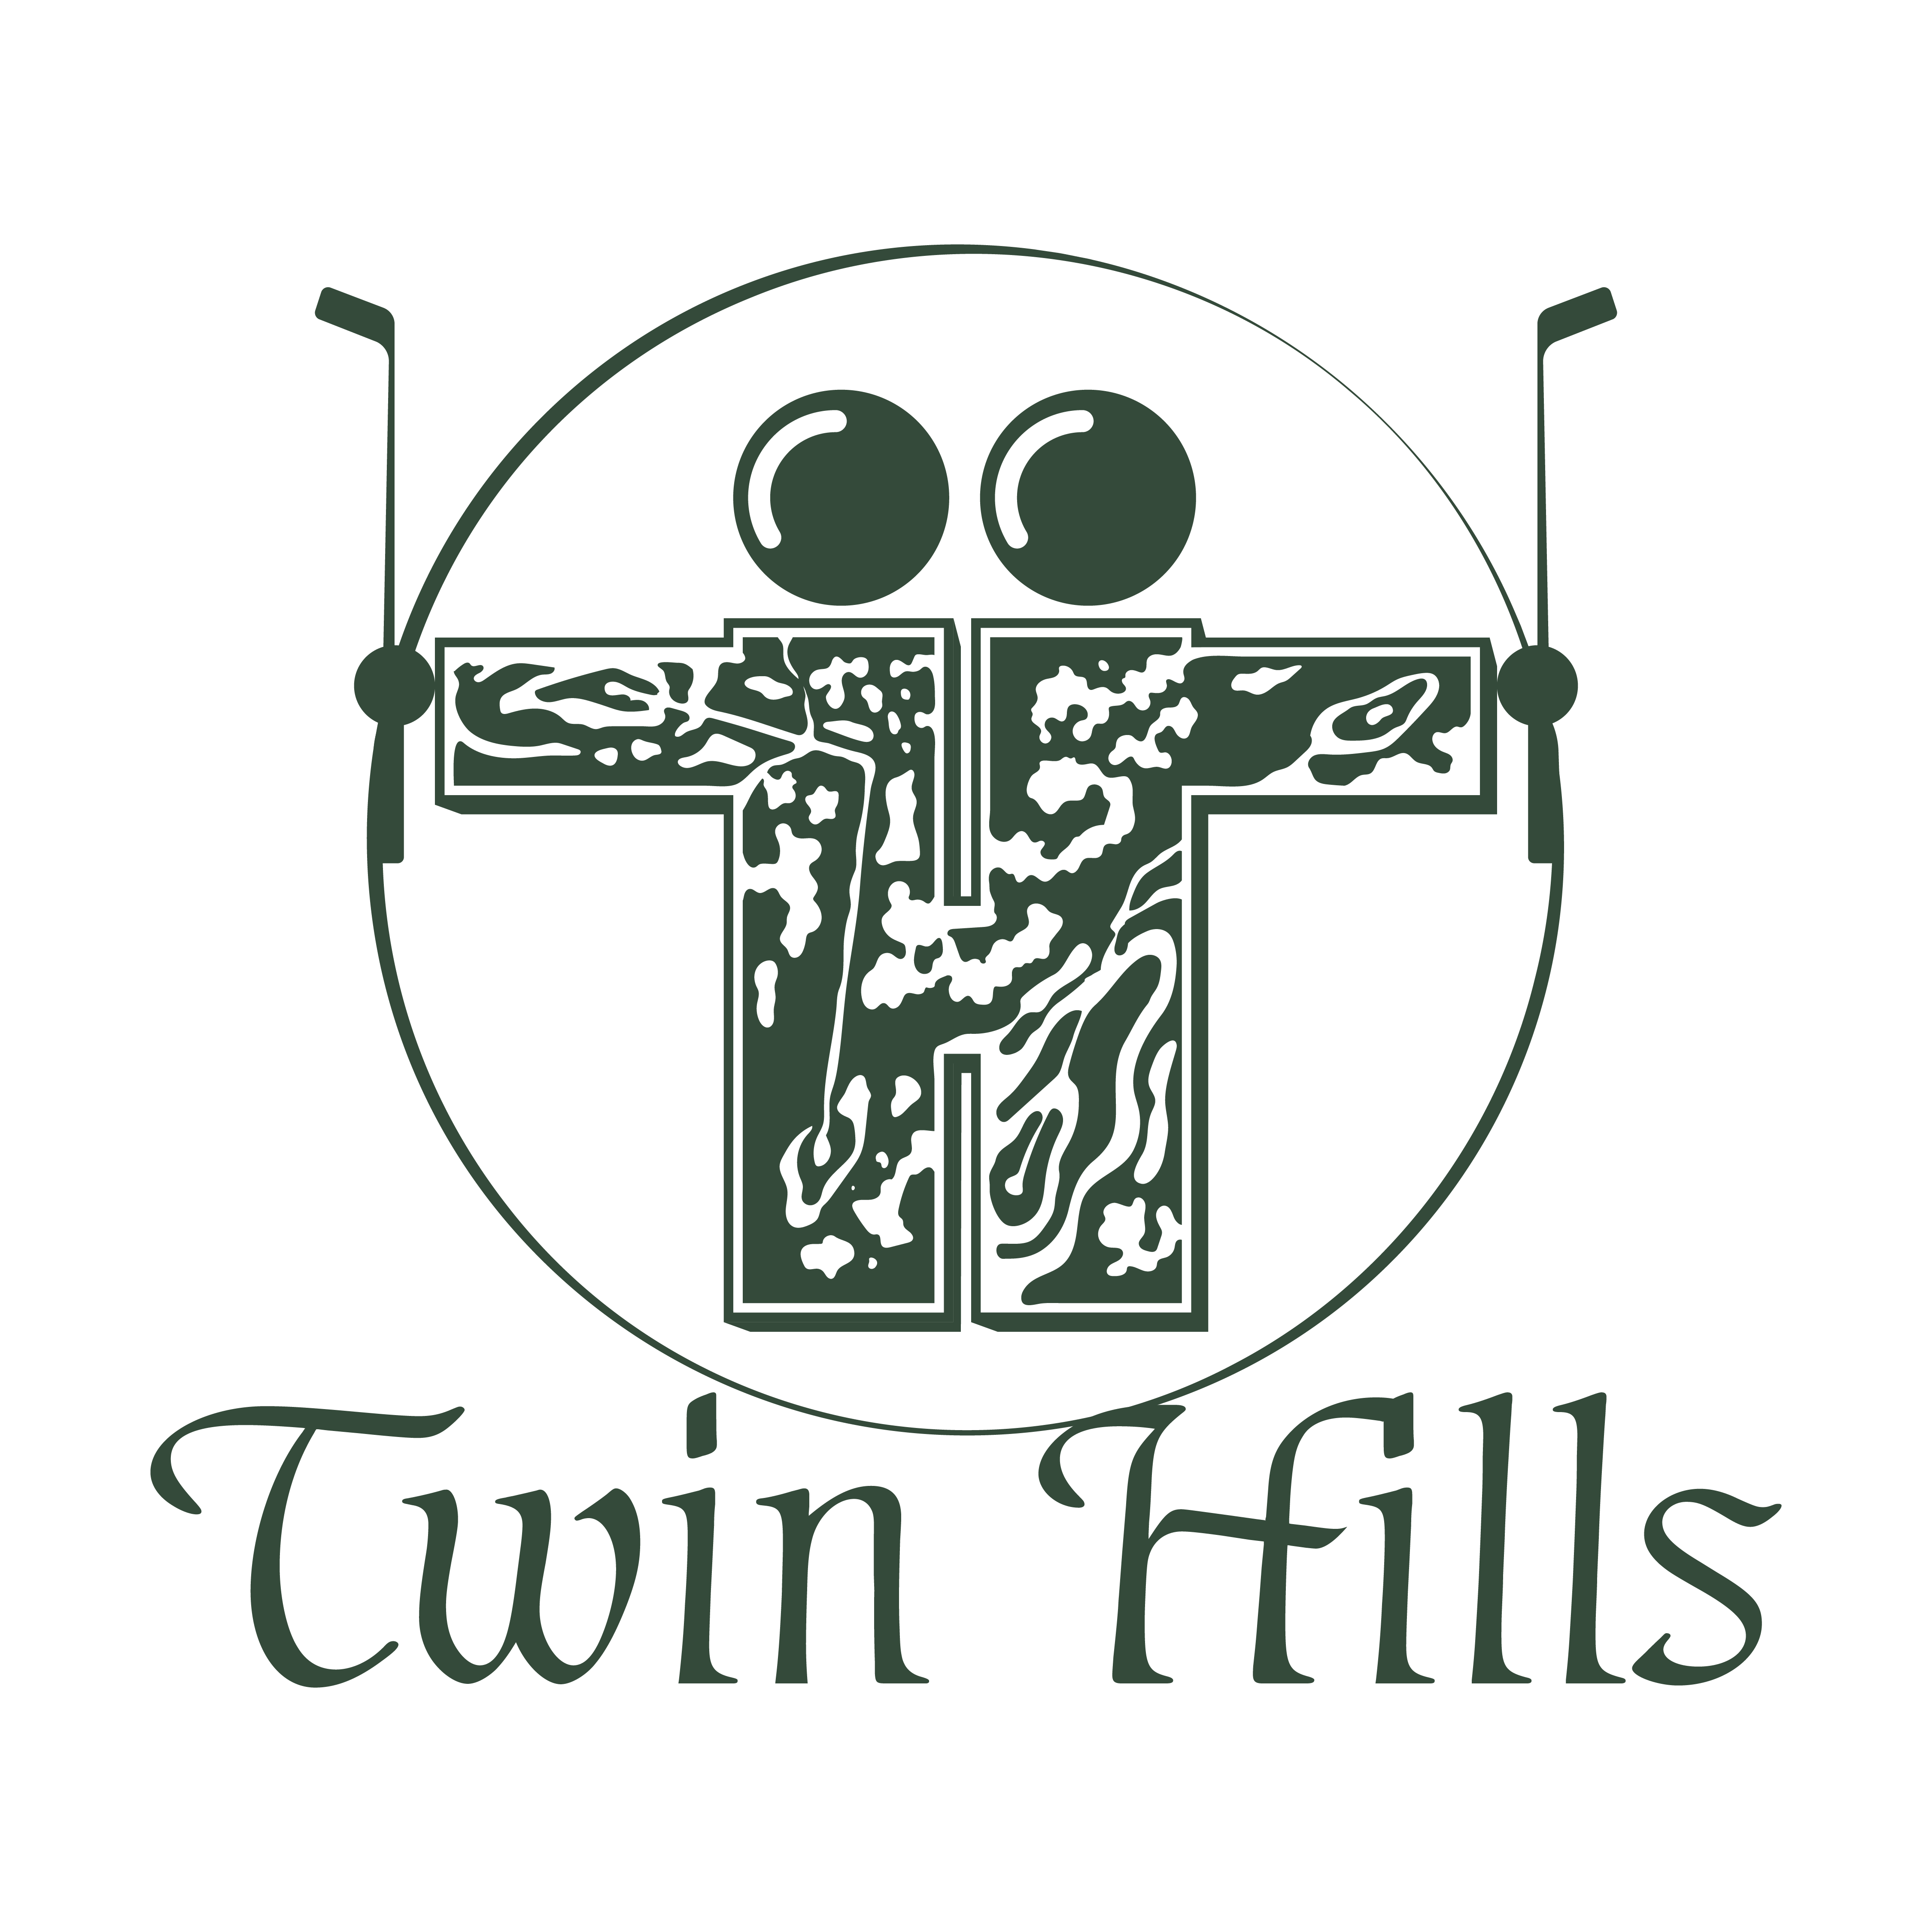 Twin Hills Golf Course